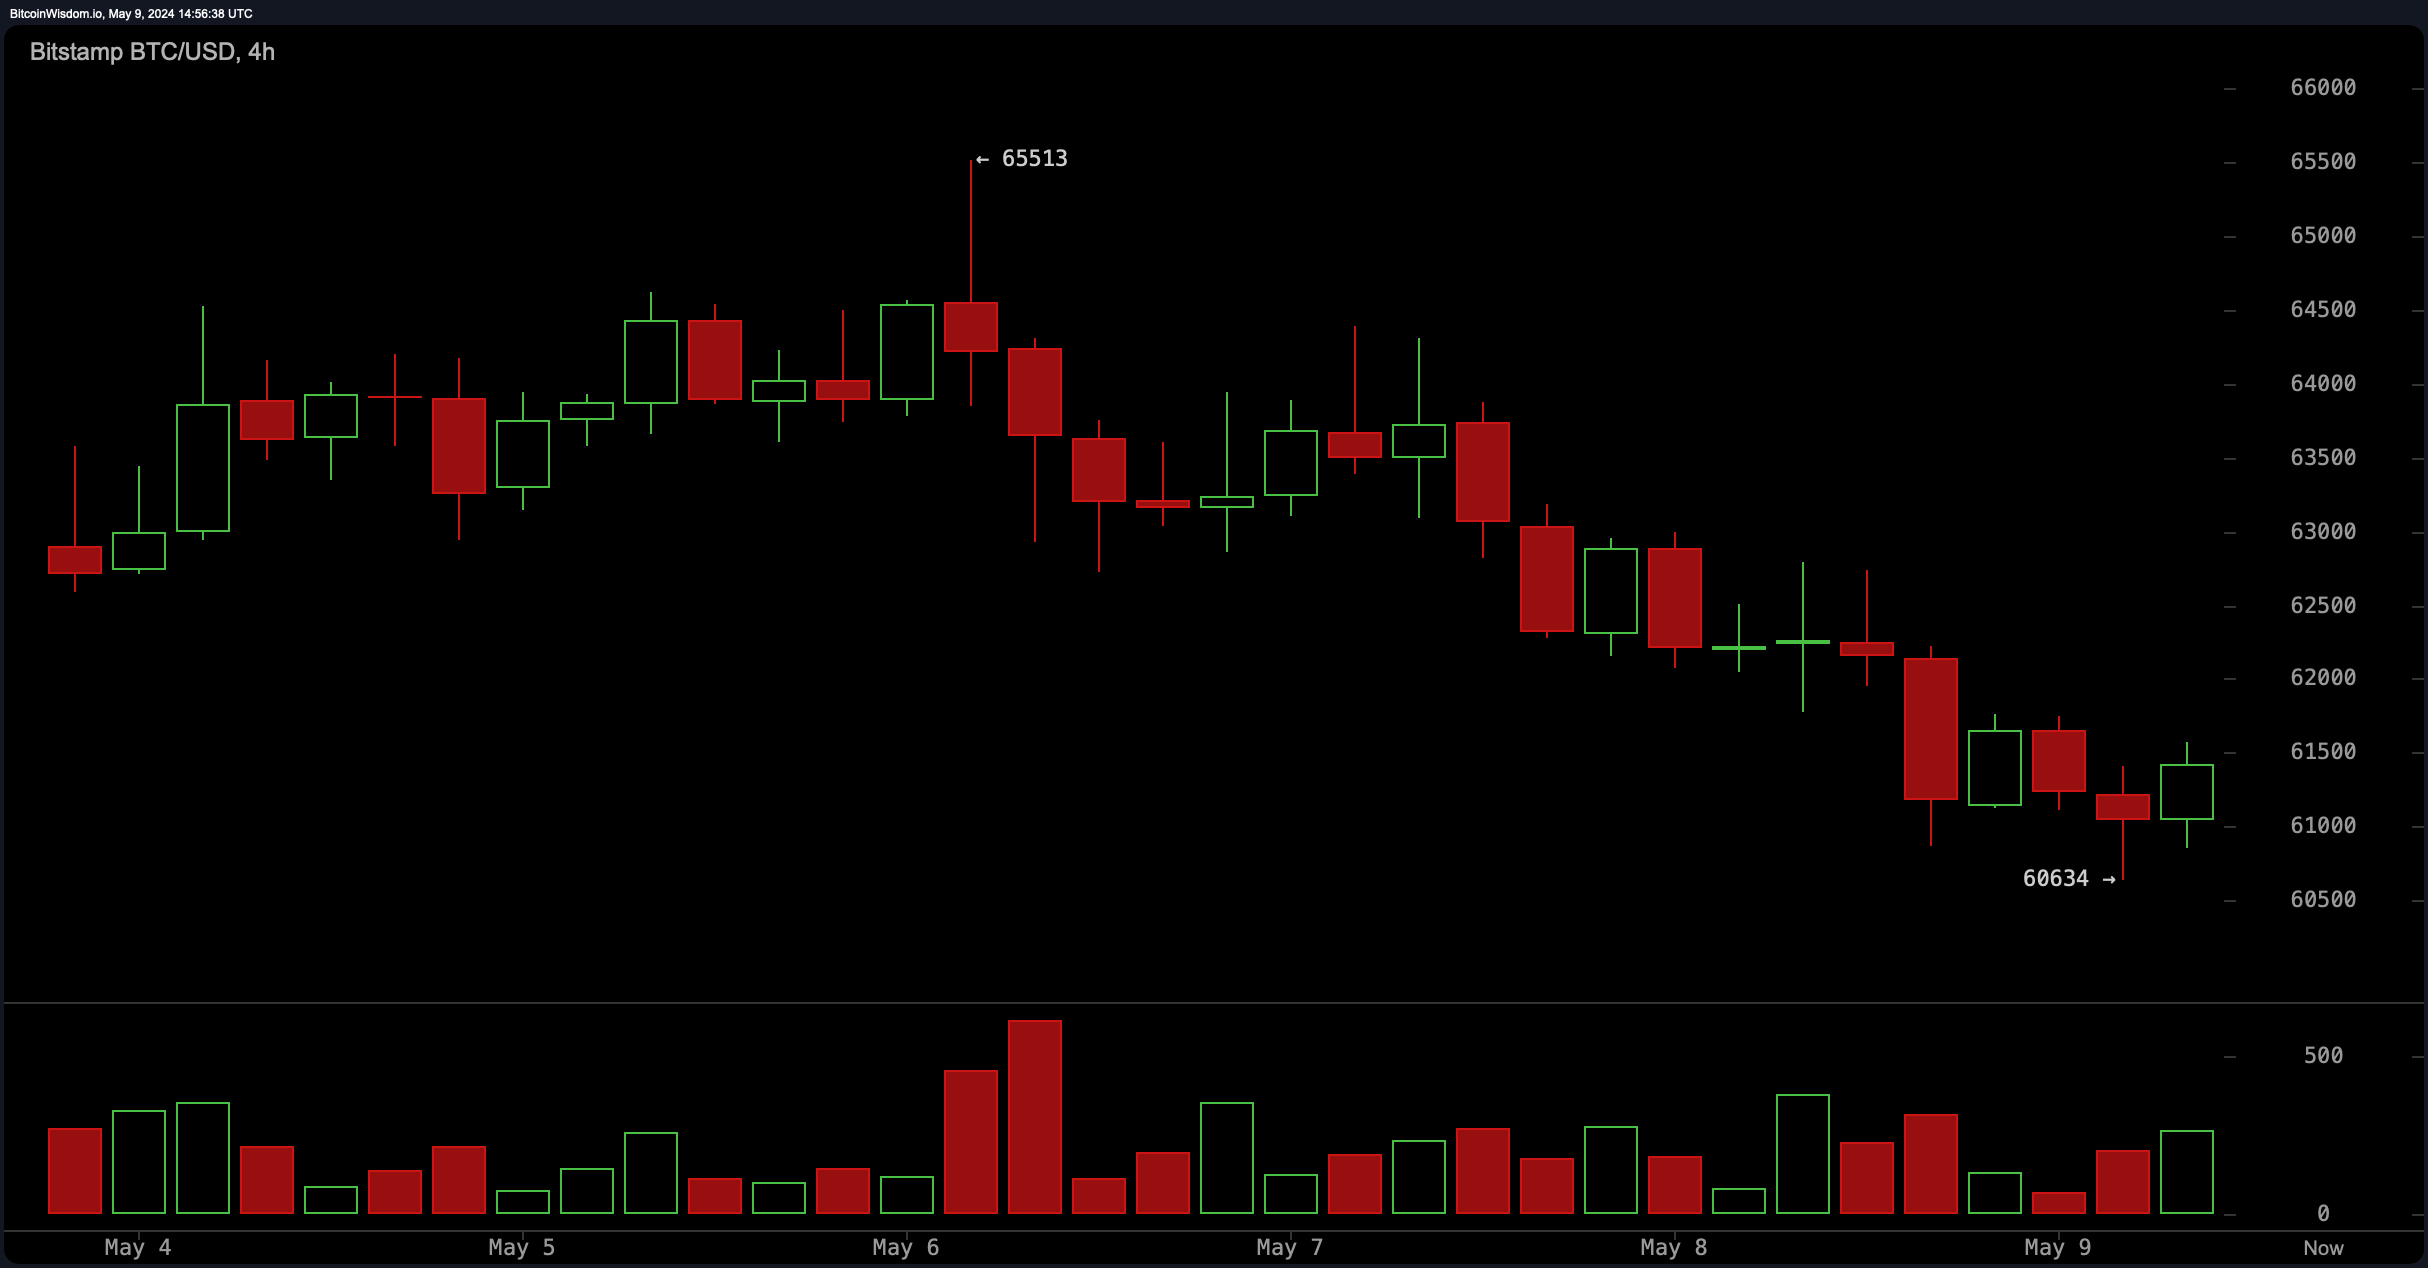 BTC Price Down 2%, Triggering Liquidation of Over $34M in Bitcoin Longs in Derivatives Shake-Up